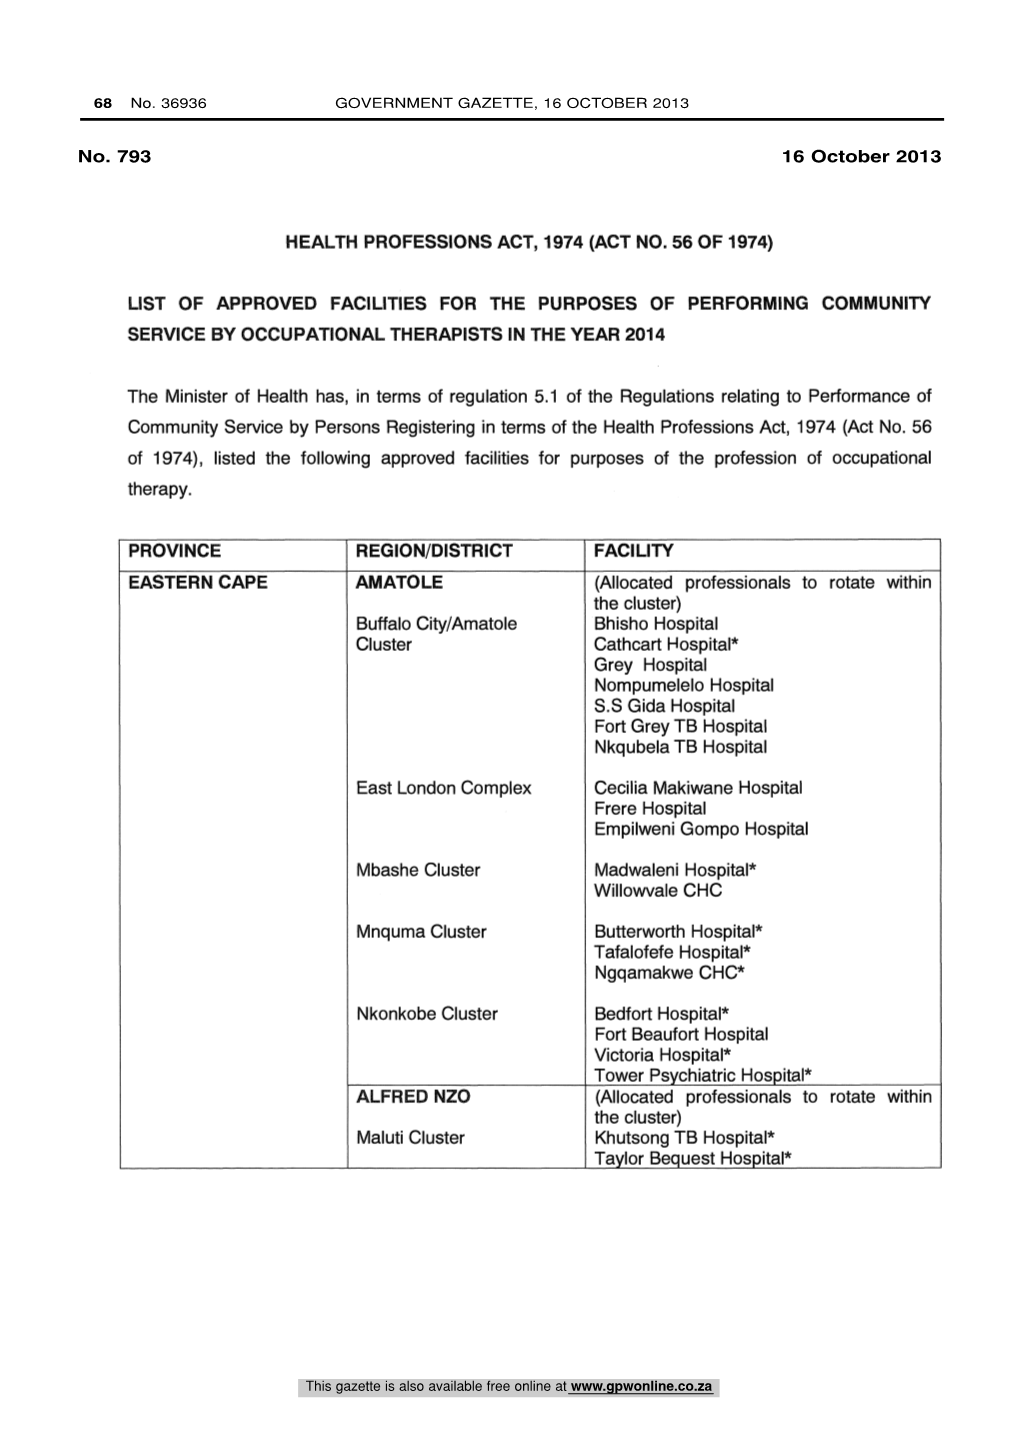 Health Professions Act: List of Approved Facilities for the Purposes